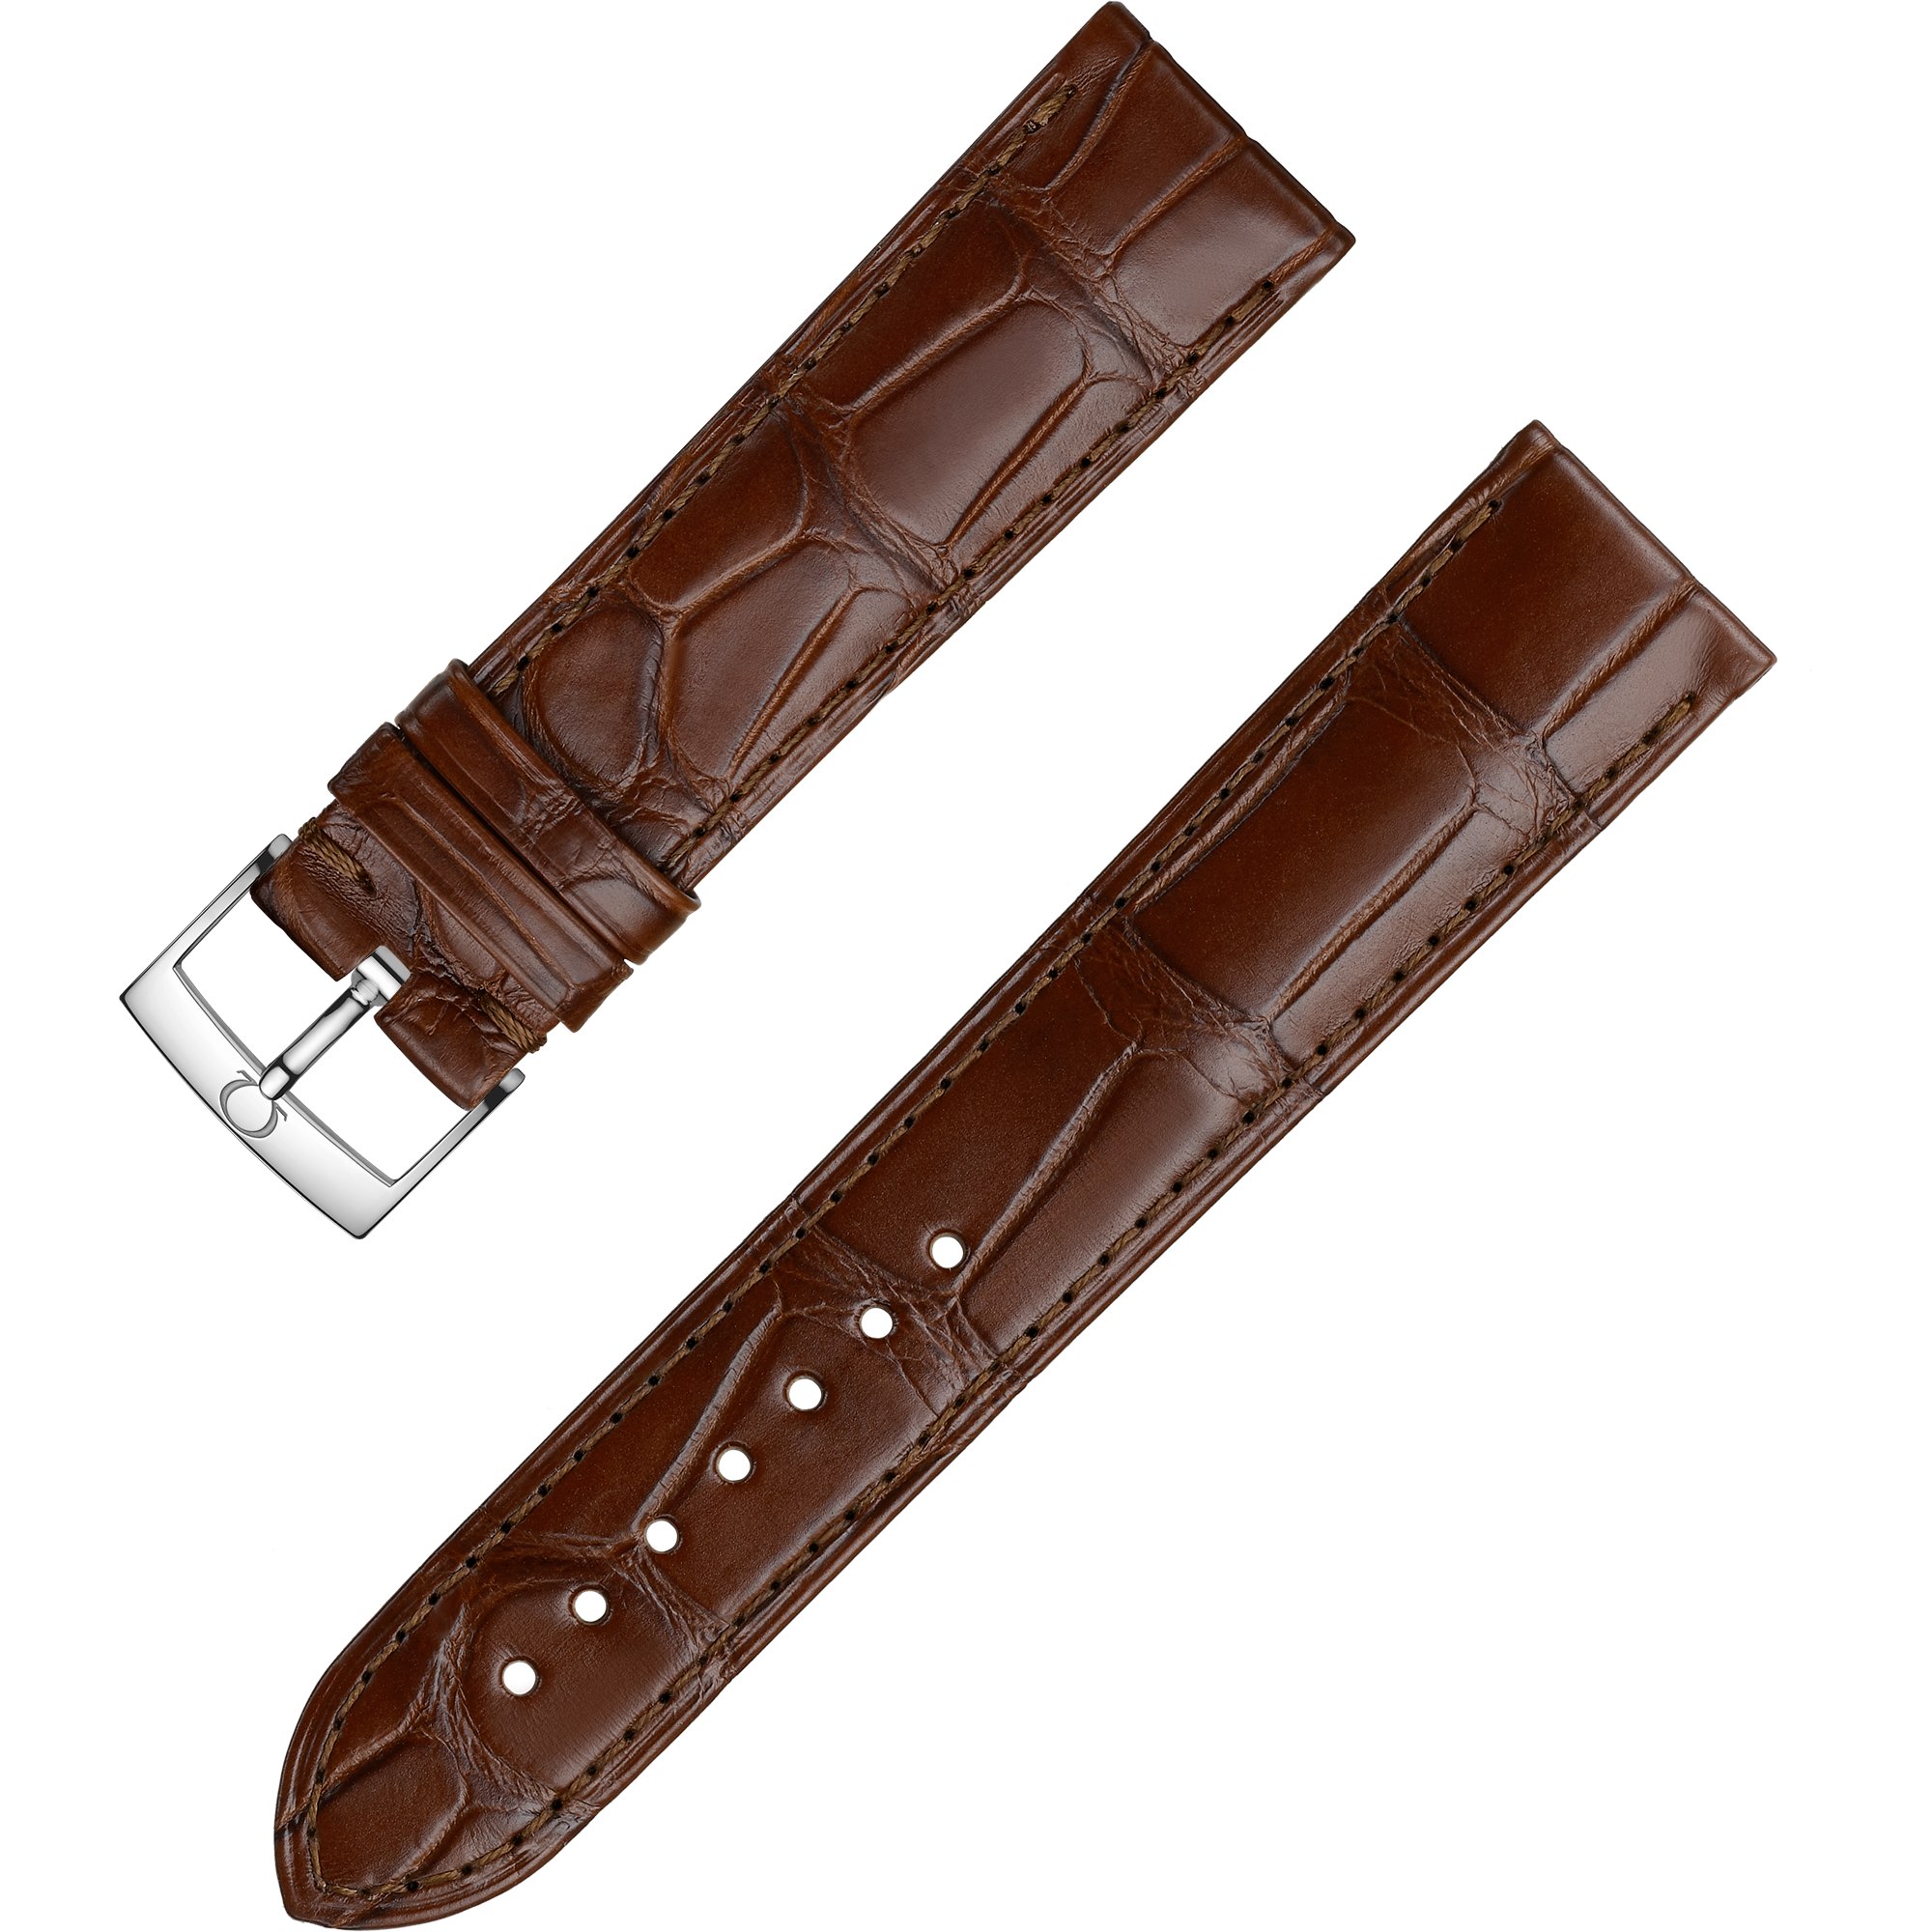 Two-piece strap - Brown alligator leather strap with pin buckle - 032CUZ010217